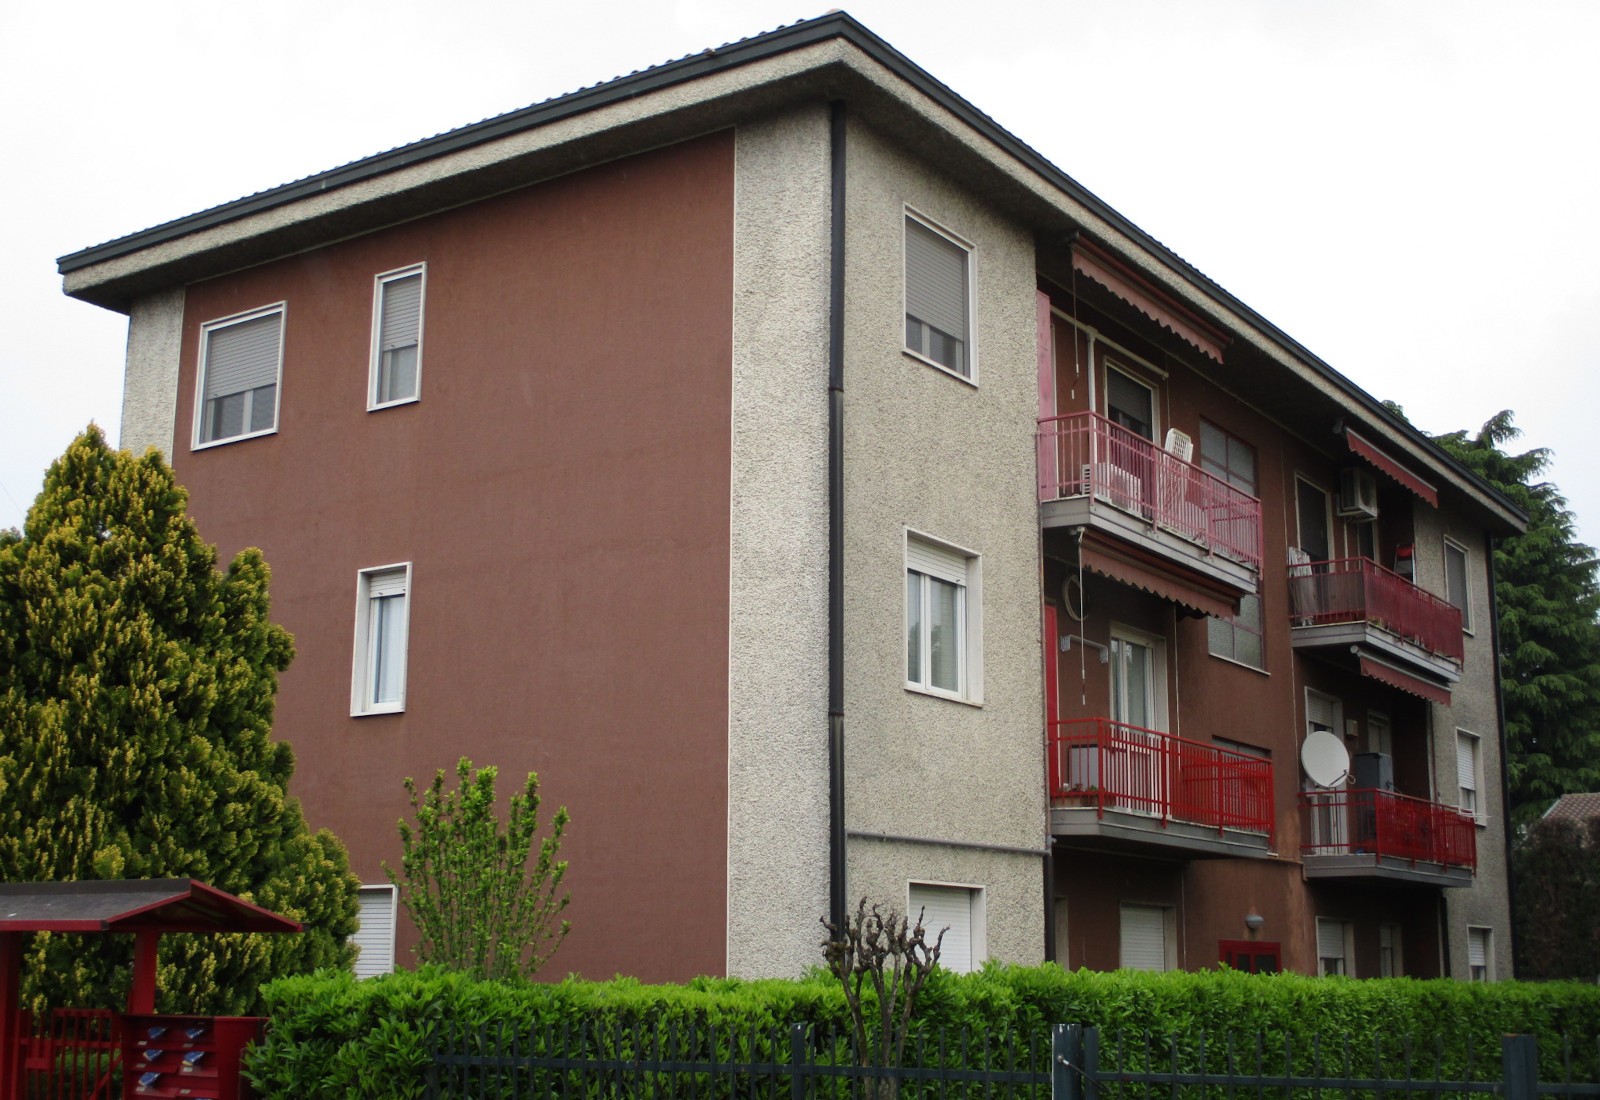 Residential ensemble (energy upgrading), 3 Gioberti street, Pogliano - View of the current situation